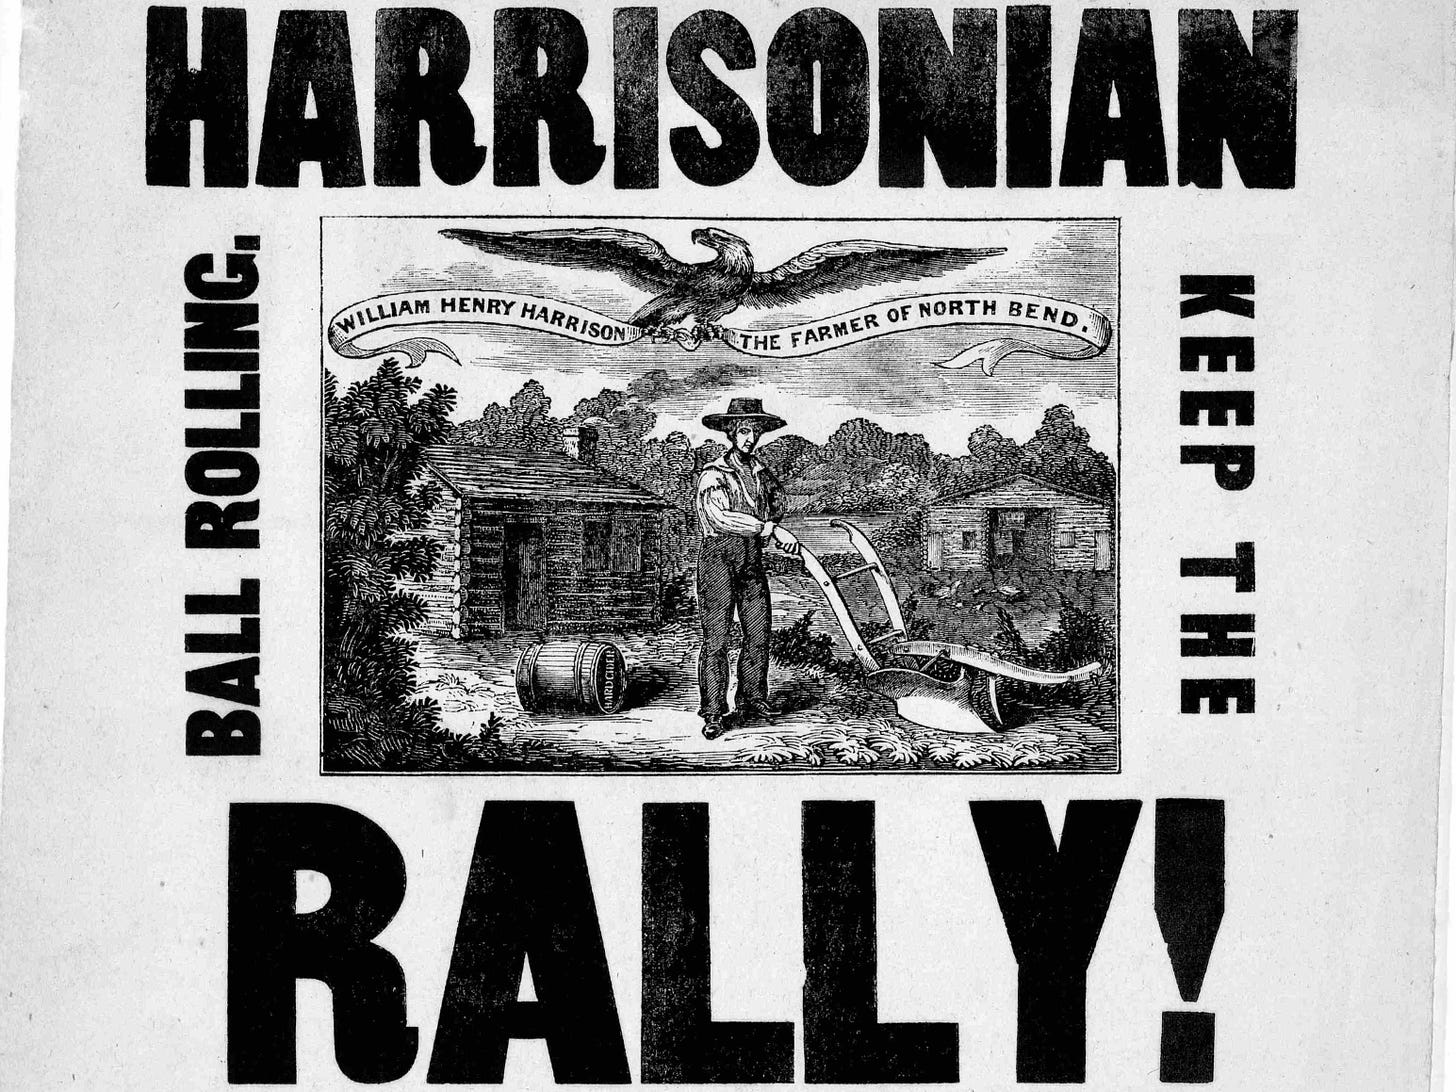 A broadside featuring the all-caps text: "HARRISONIAN RALLY! KEEP THE BALL ROLLING." It also depicts a farmer pushing a plow with the following phrase emblazoned on a banner held by an eagle in its claws: "WILLIAM HENRY HARRISON THE FARMER OF NORTH BEND."